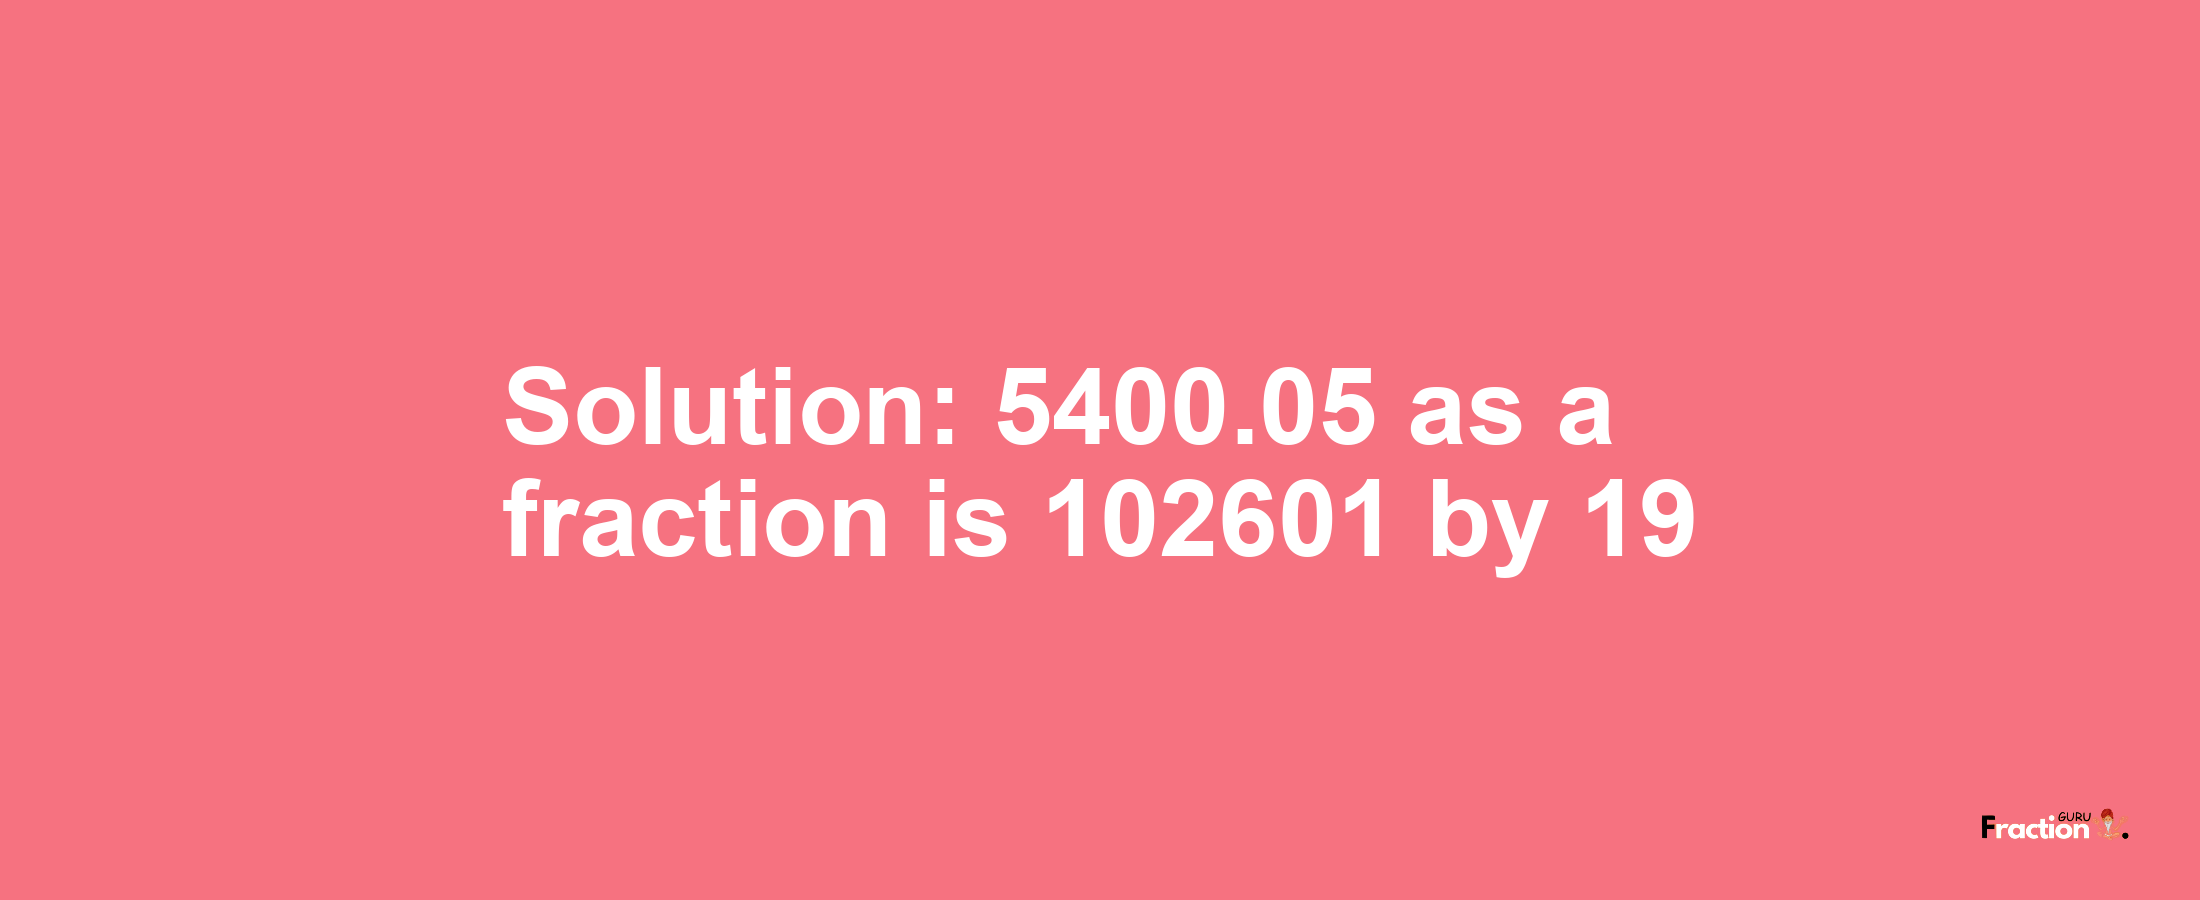 Solution:5400.05 as a fraction is 102601/19